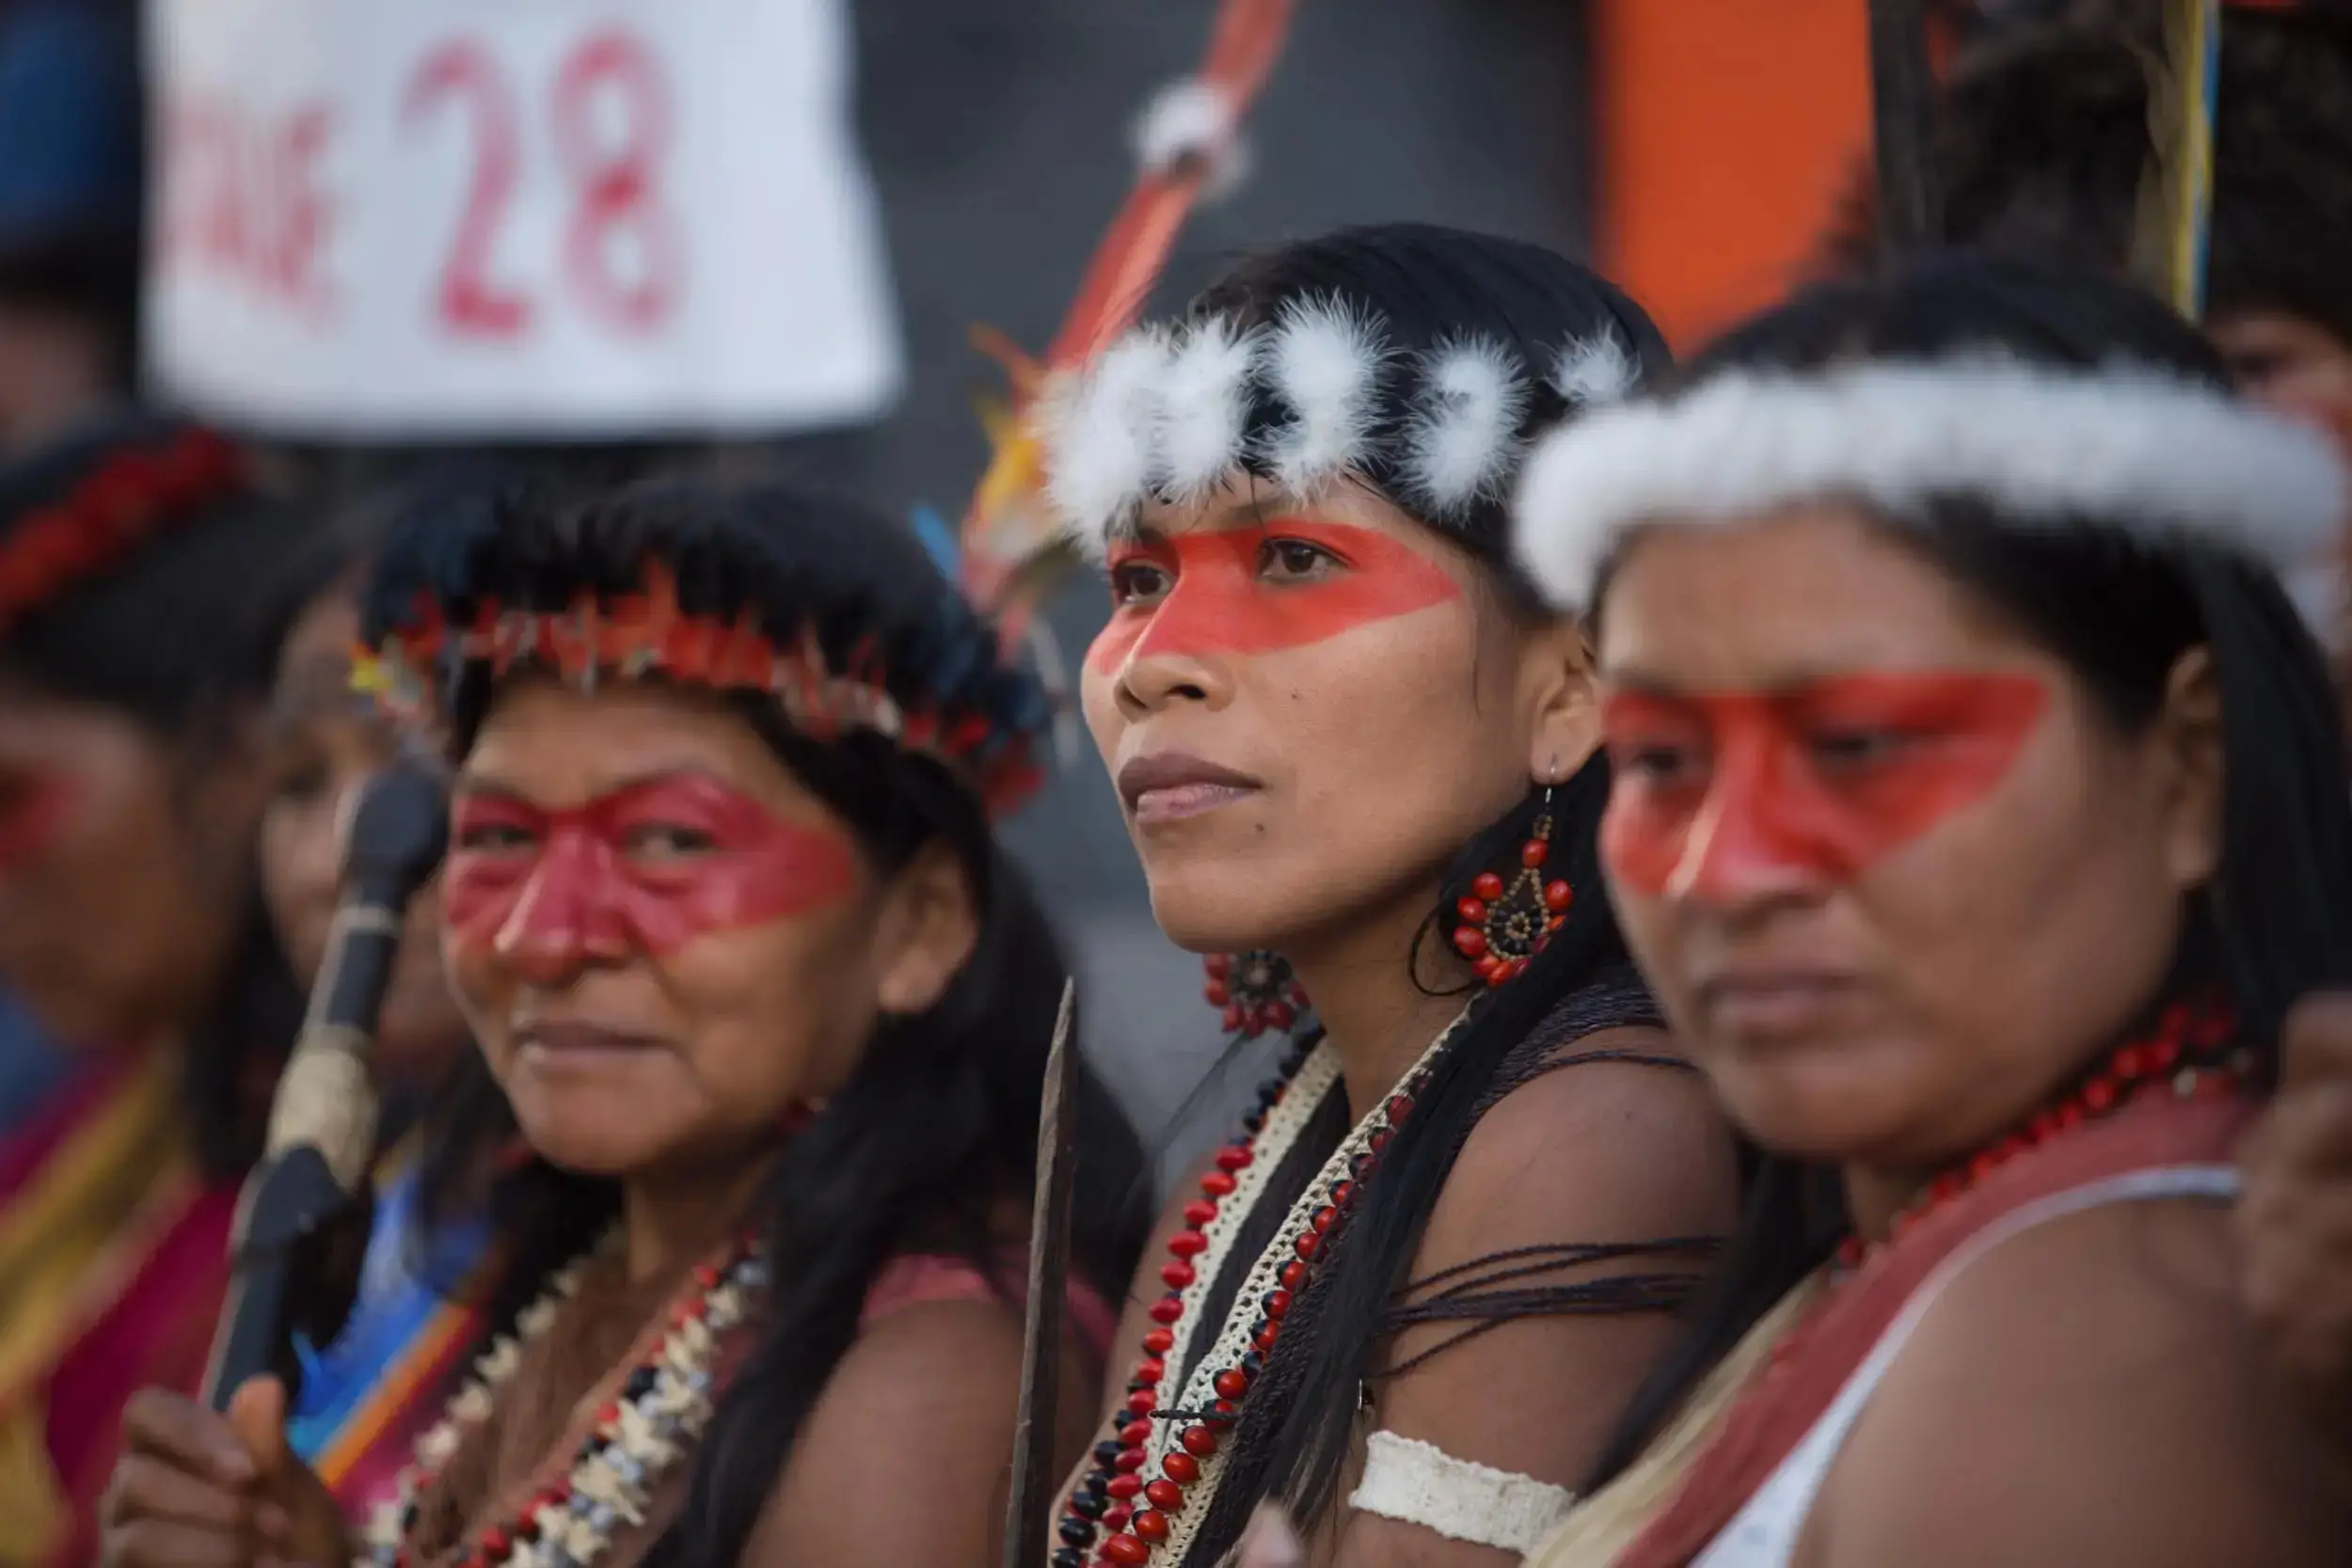 Indigenous rights activist Nemonte Nenquimo (center) is a Waorani woman who led the legal process that suspended the oil exploitation that threatened her community in Pastaza